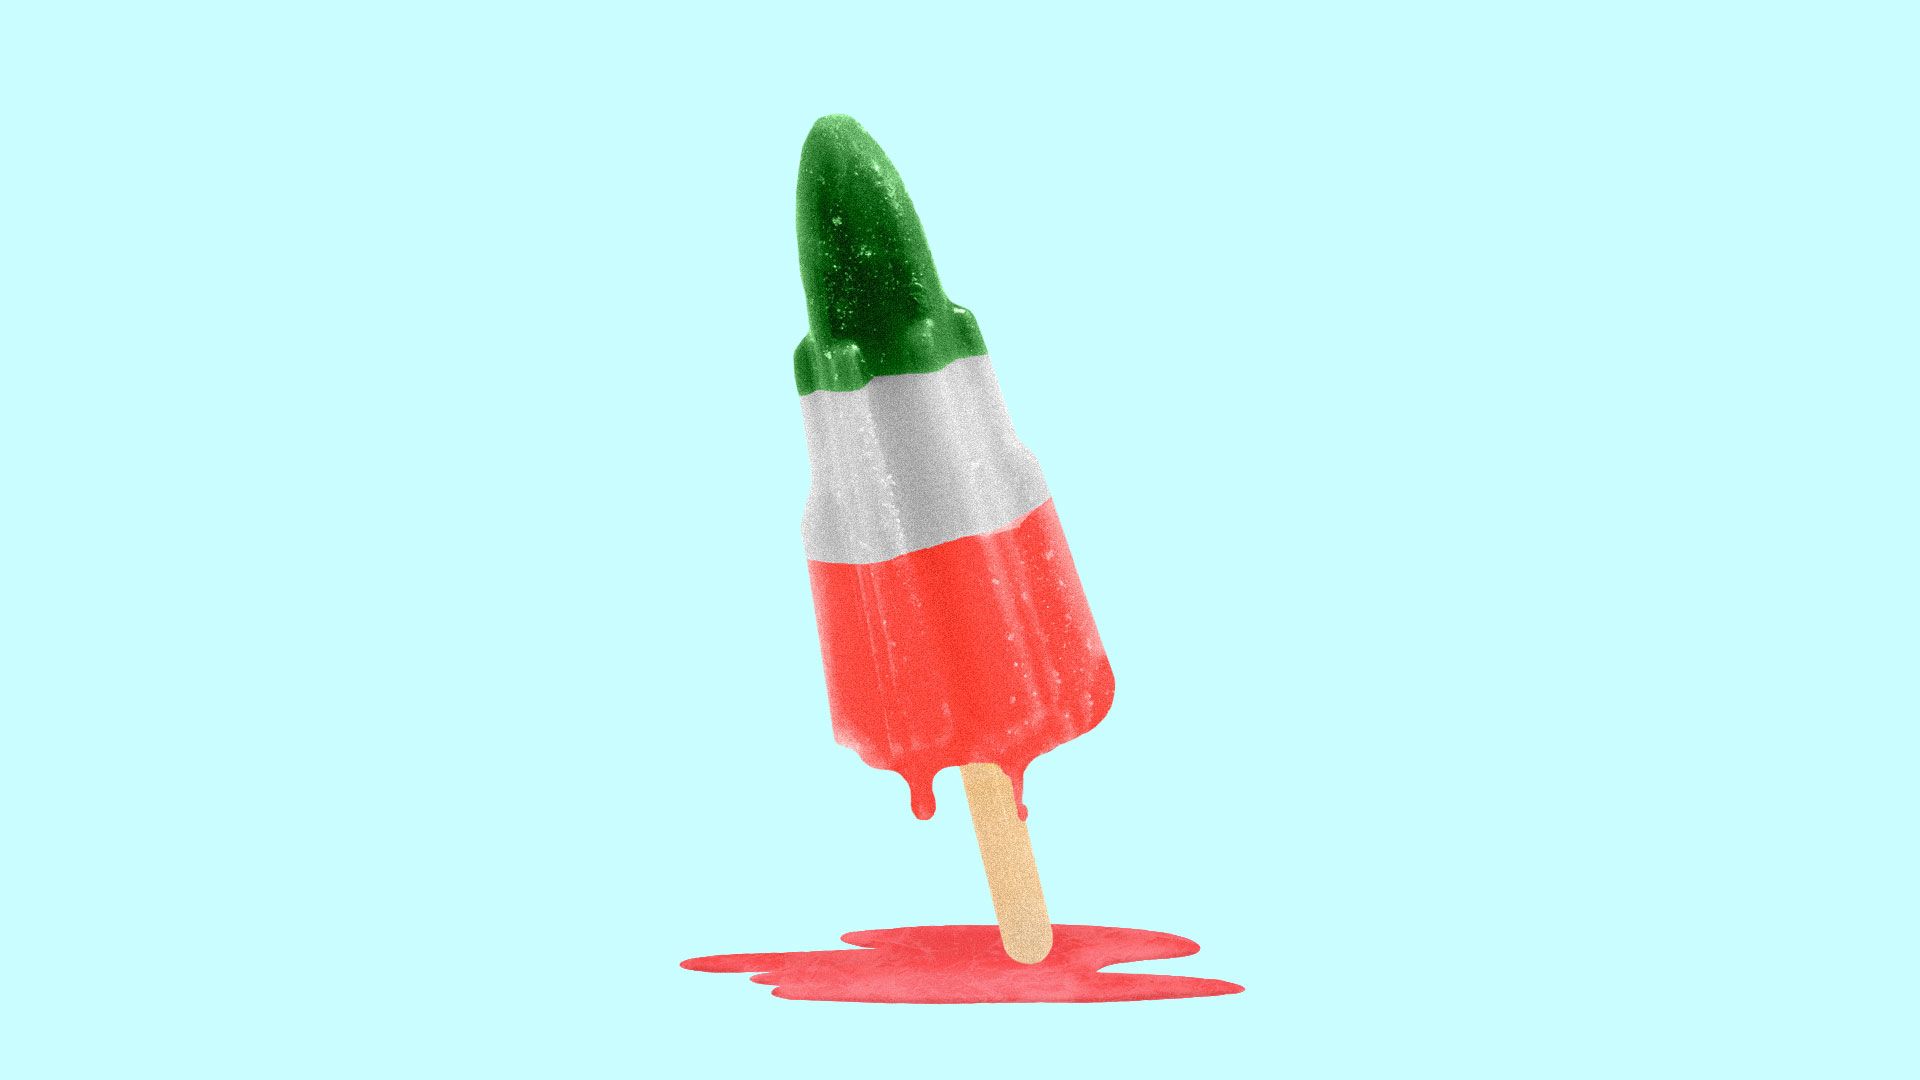 Illustration of a melting popsicle made up of the Iranian flag colors